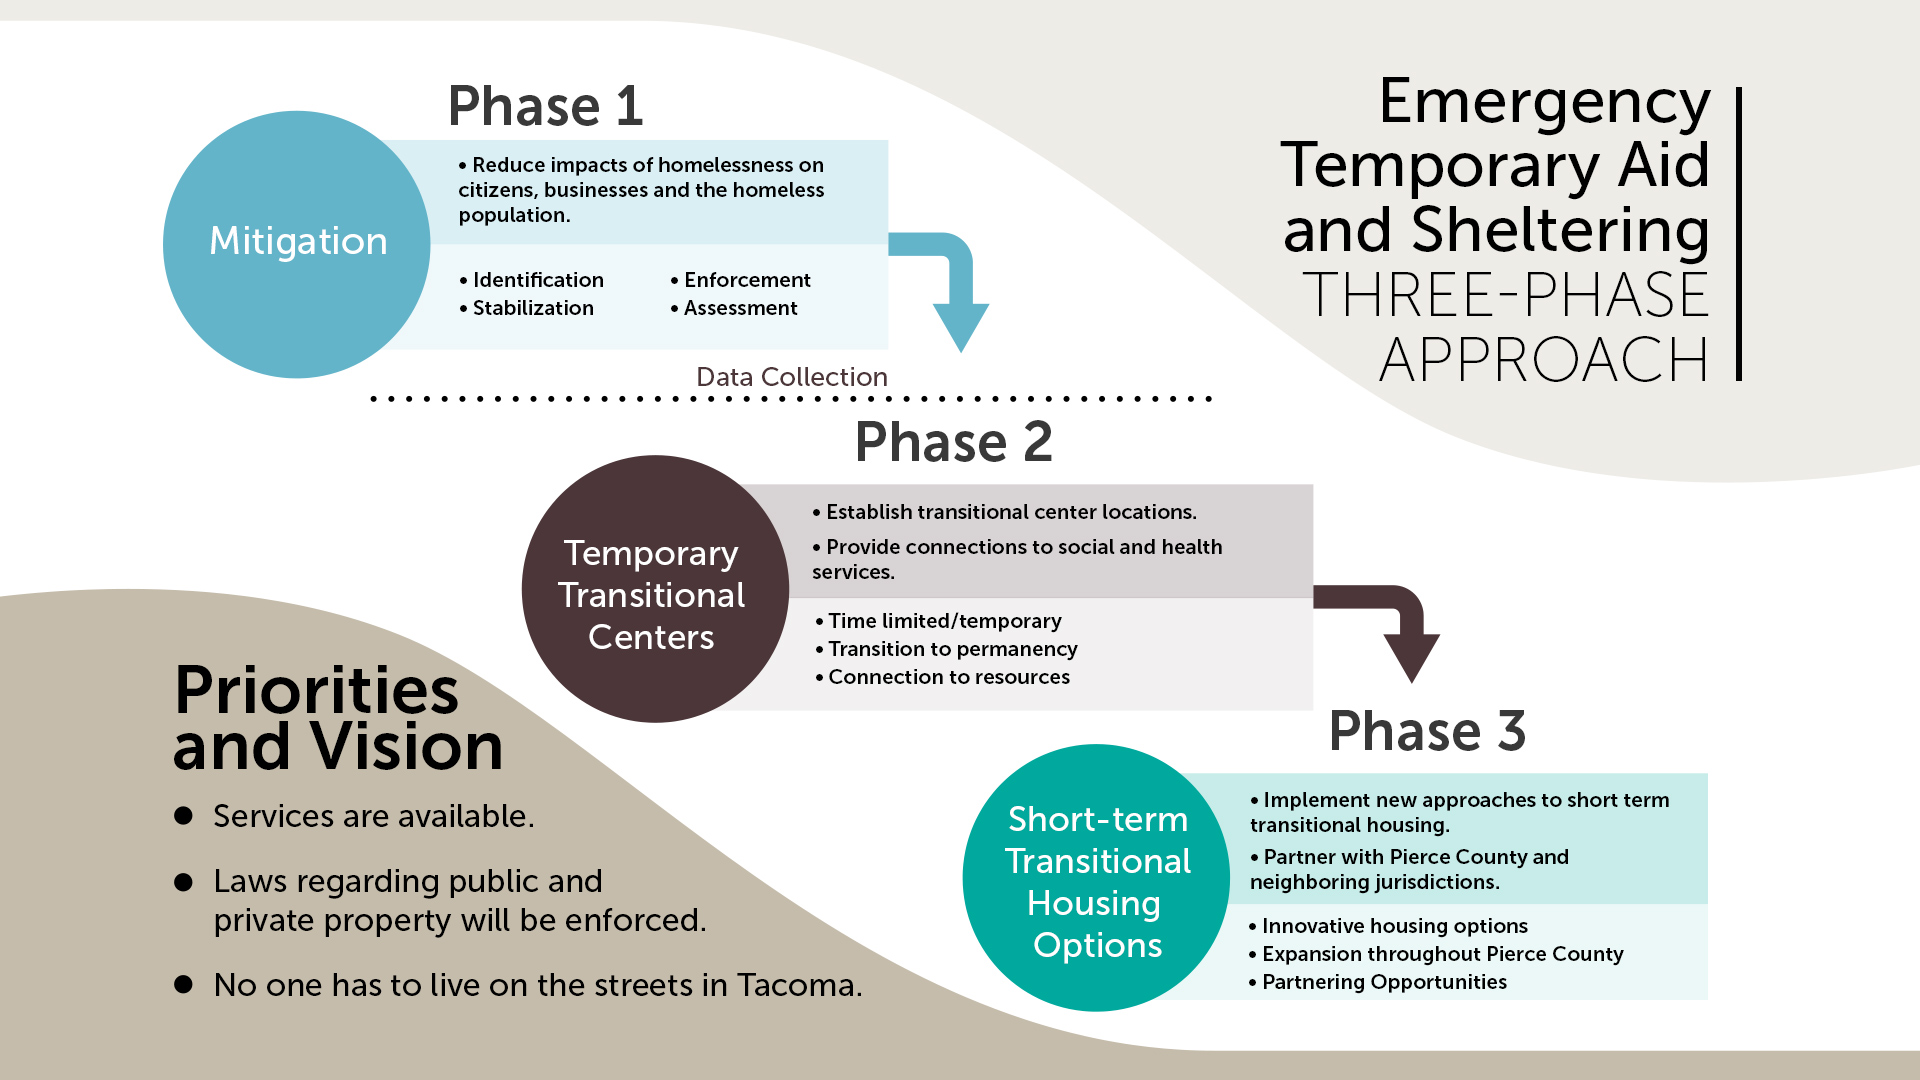 Emergency Temporary Aid and Sheltering Program graphic